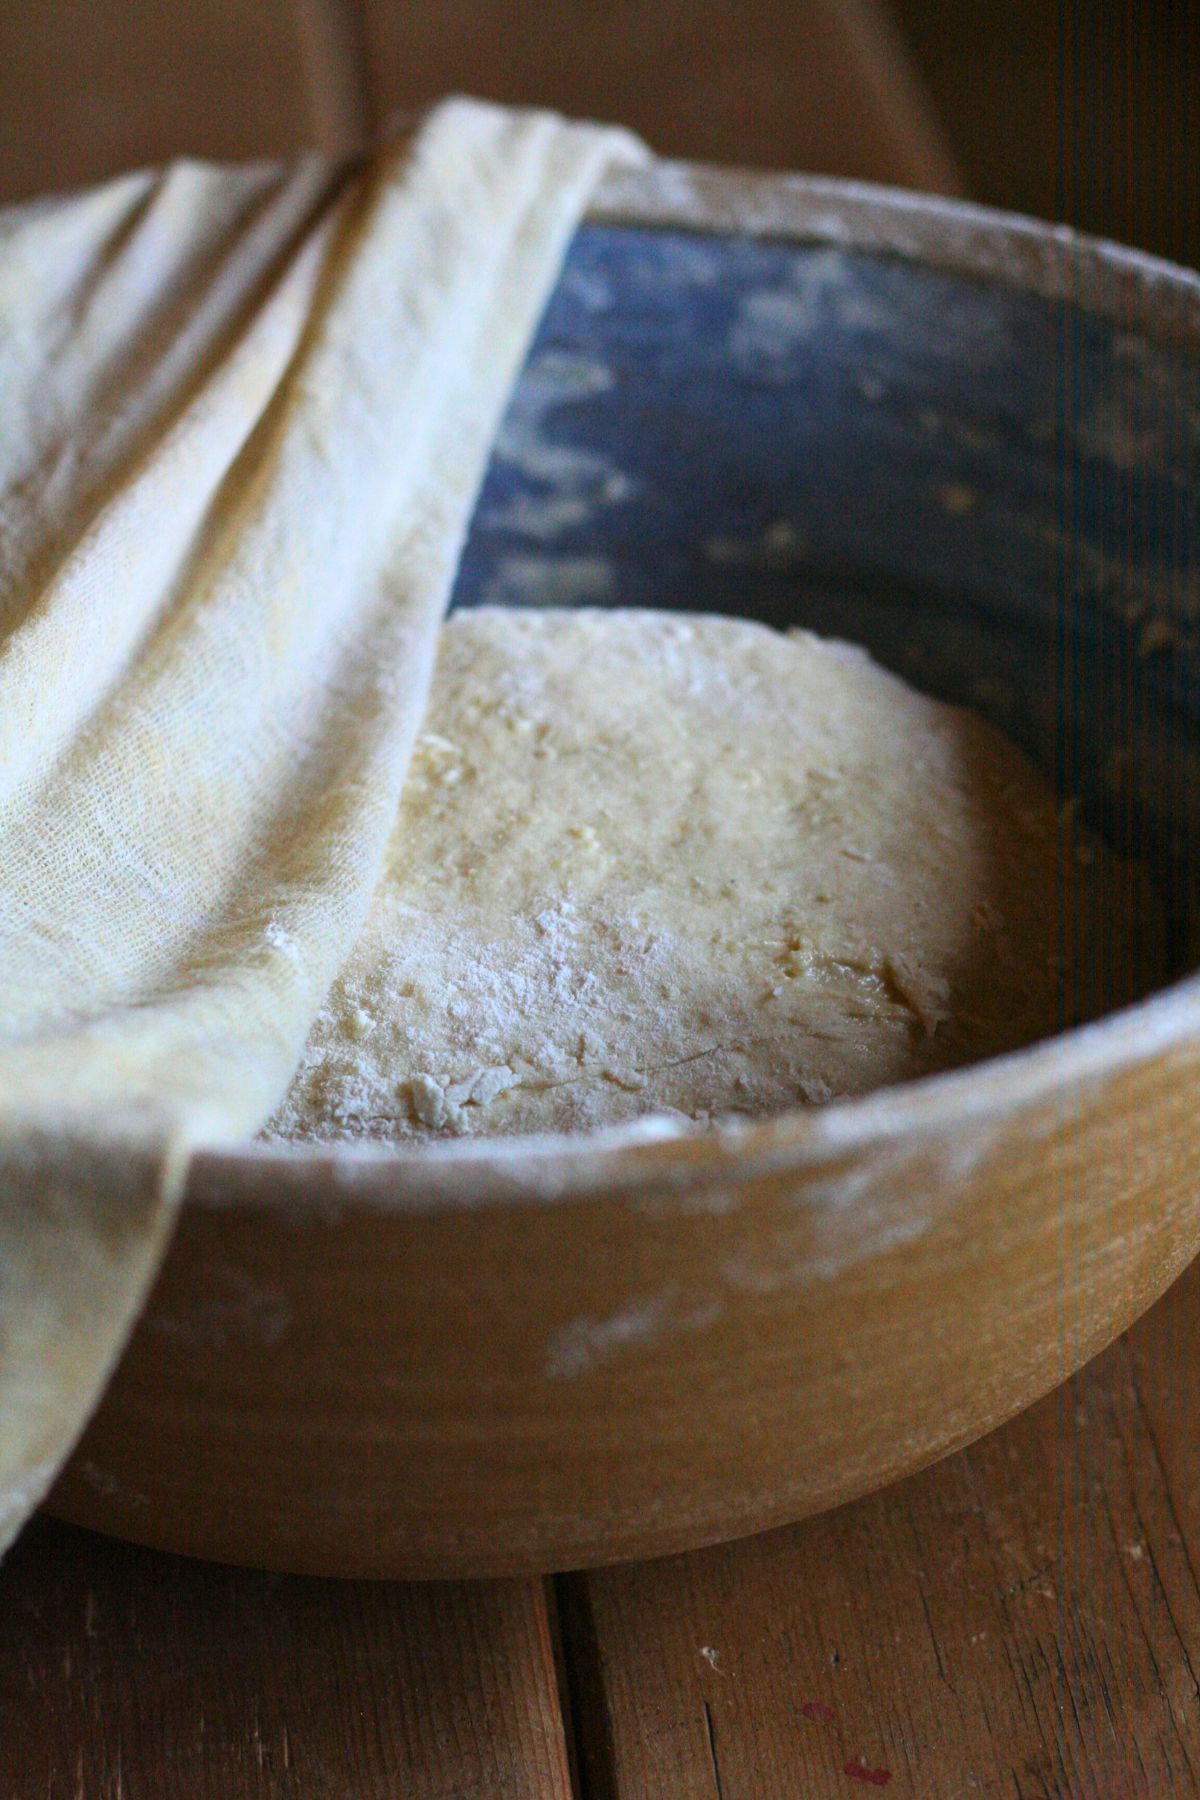 Sourdough resting in a bowl covered with a towel.